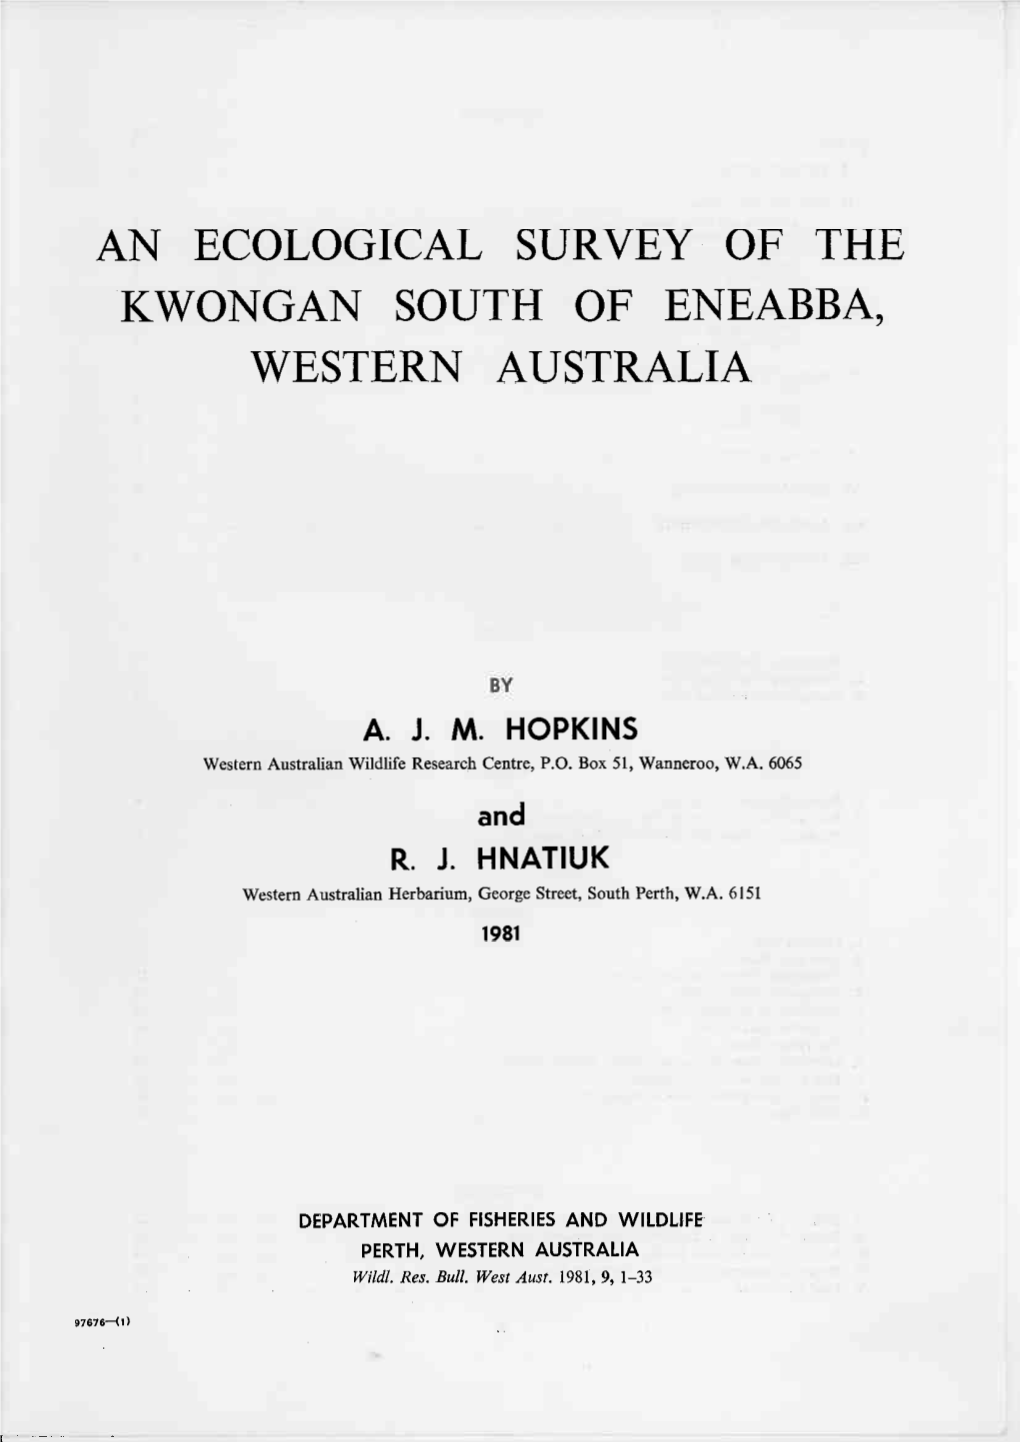 An Ecological Survey of the Kwongan South of Eneabba, Western Australia